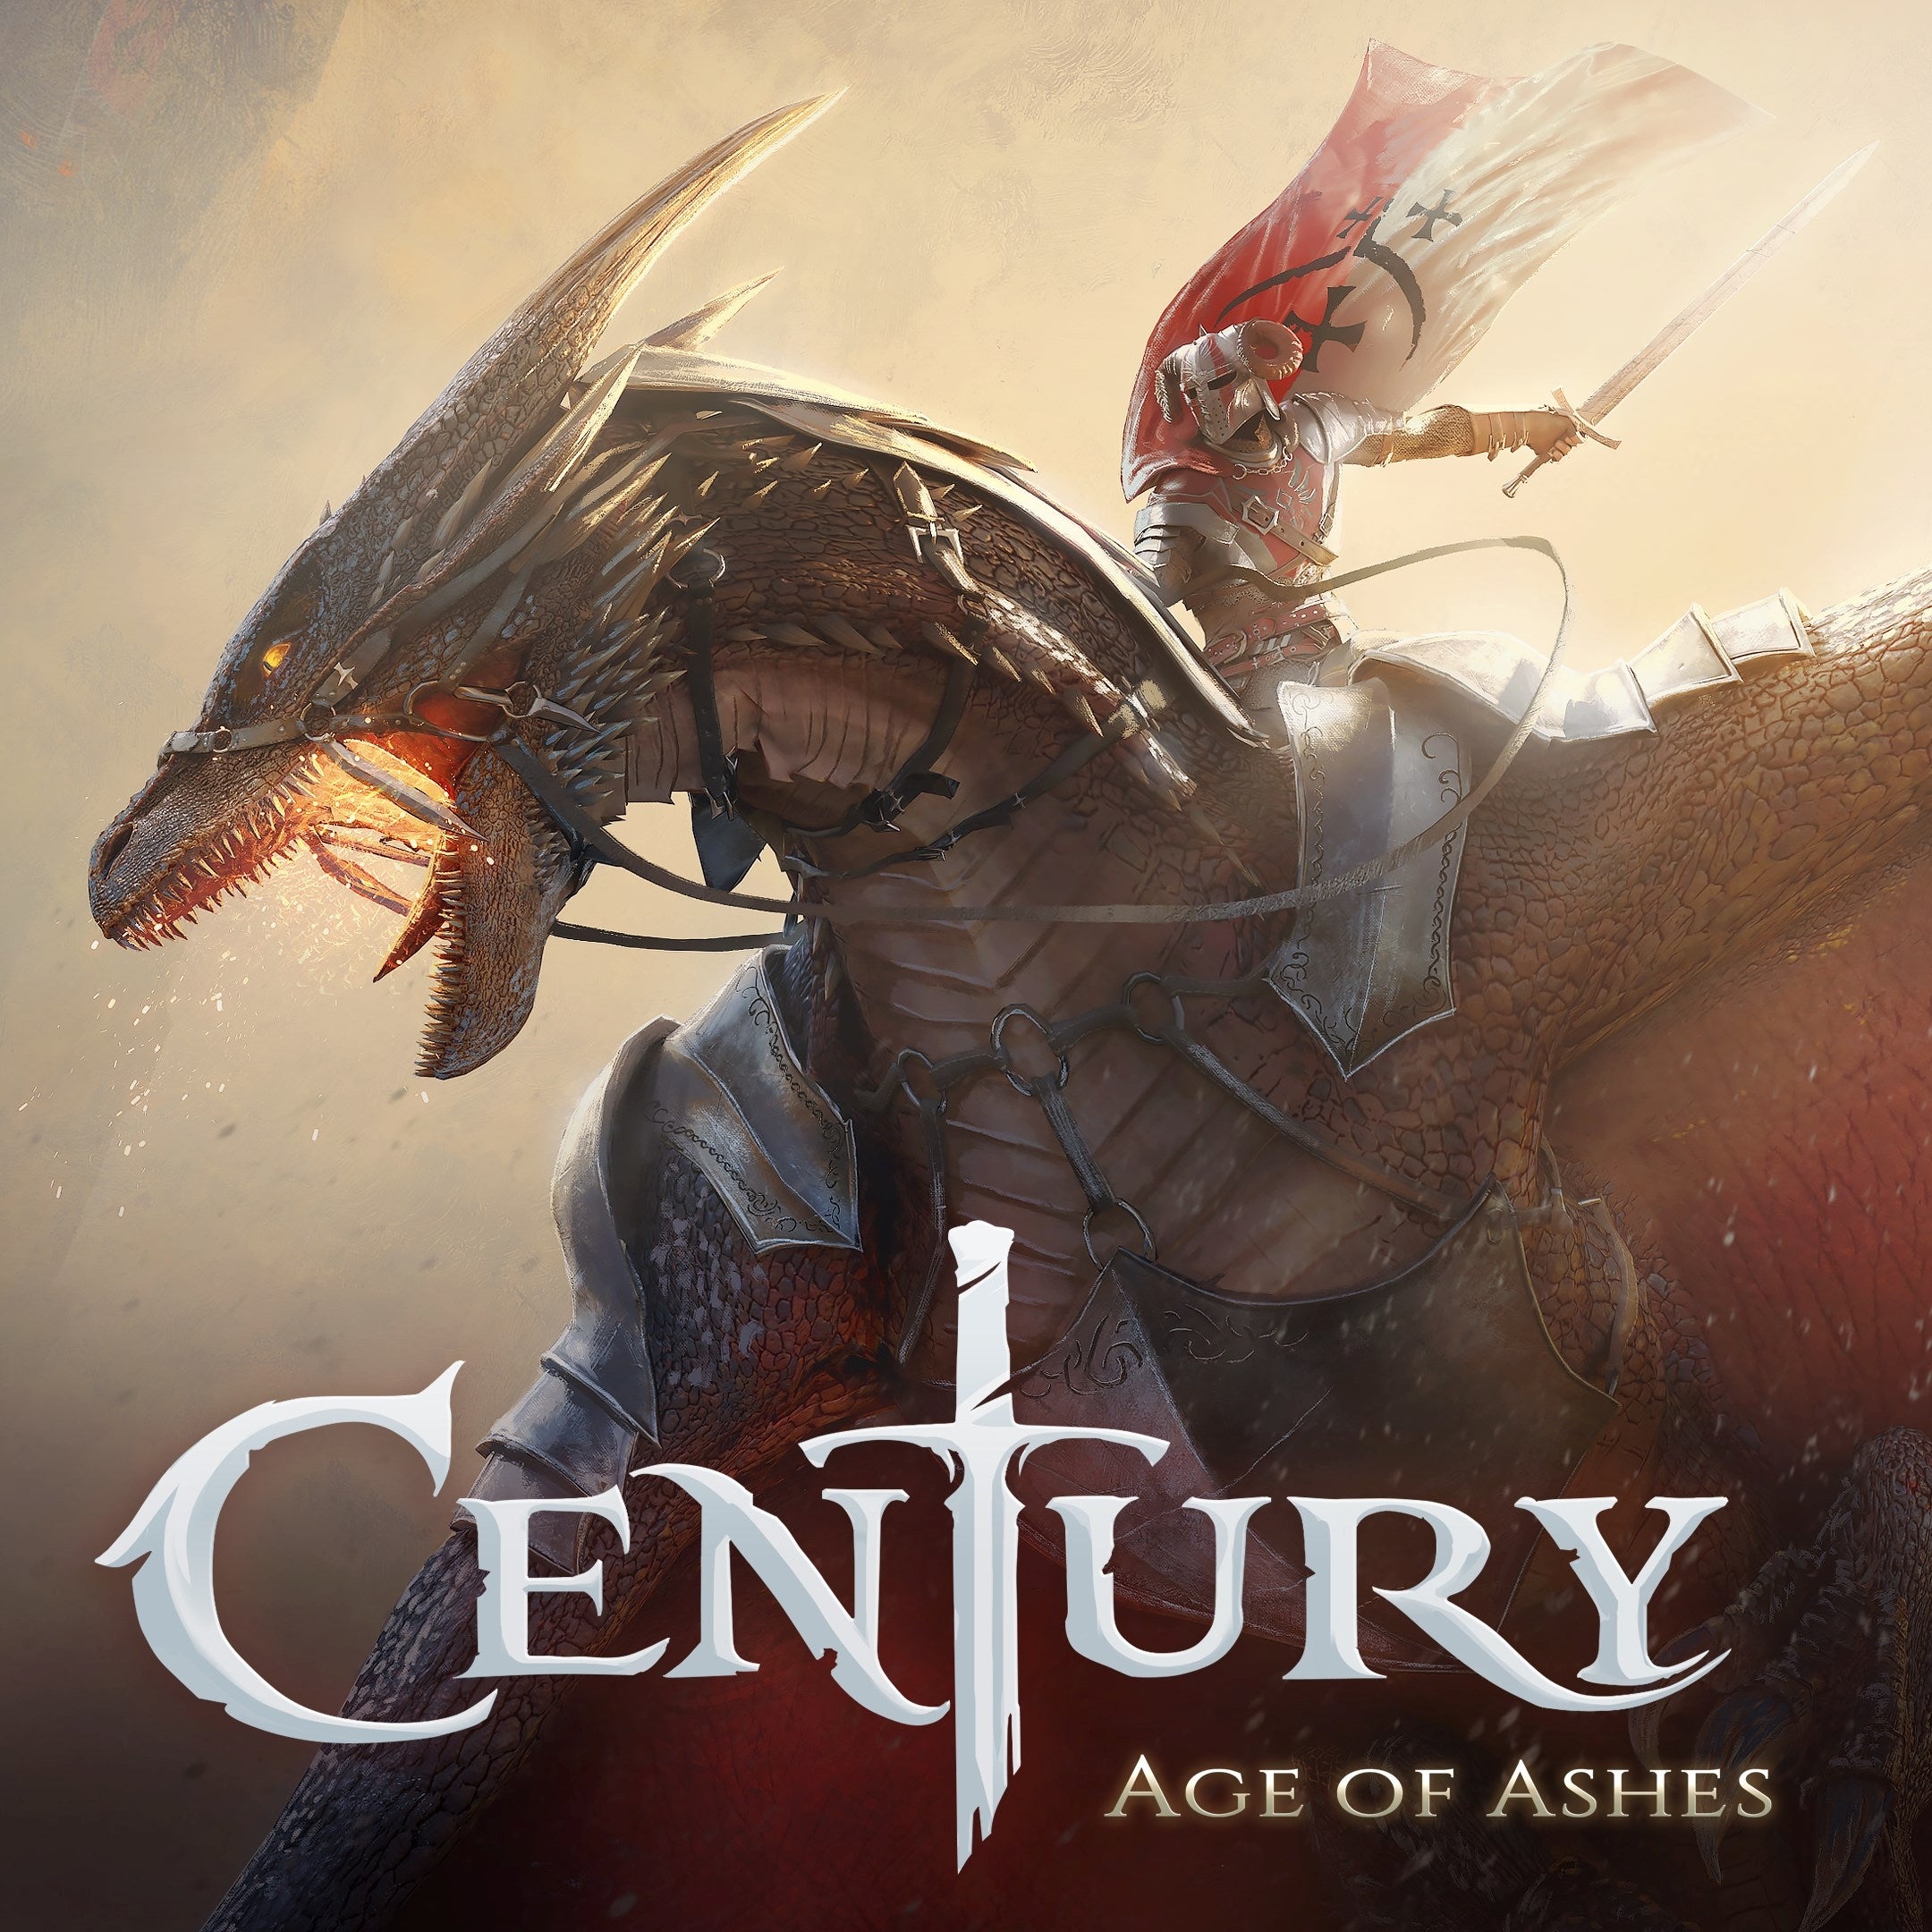 Century Age of Ashes Warrior Wallpapers